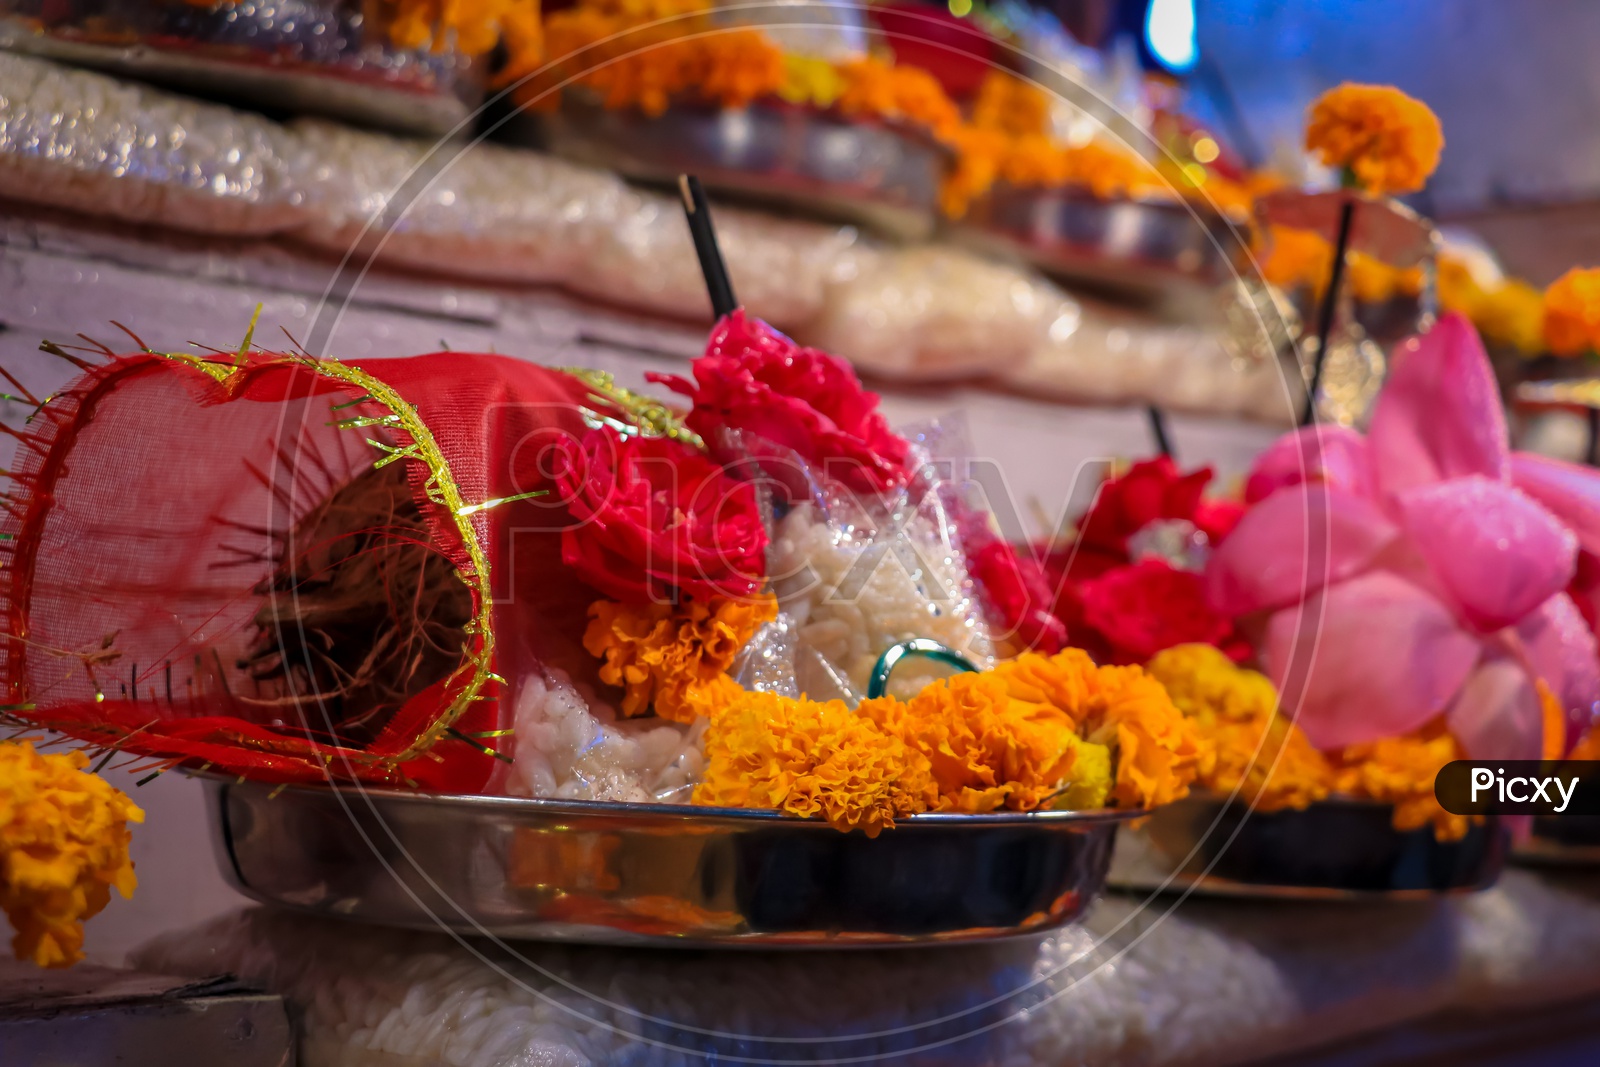 Pooja items being sold at a shop